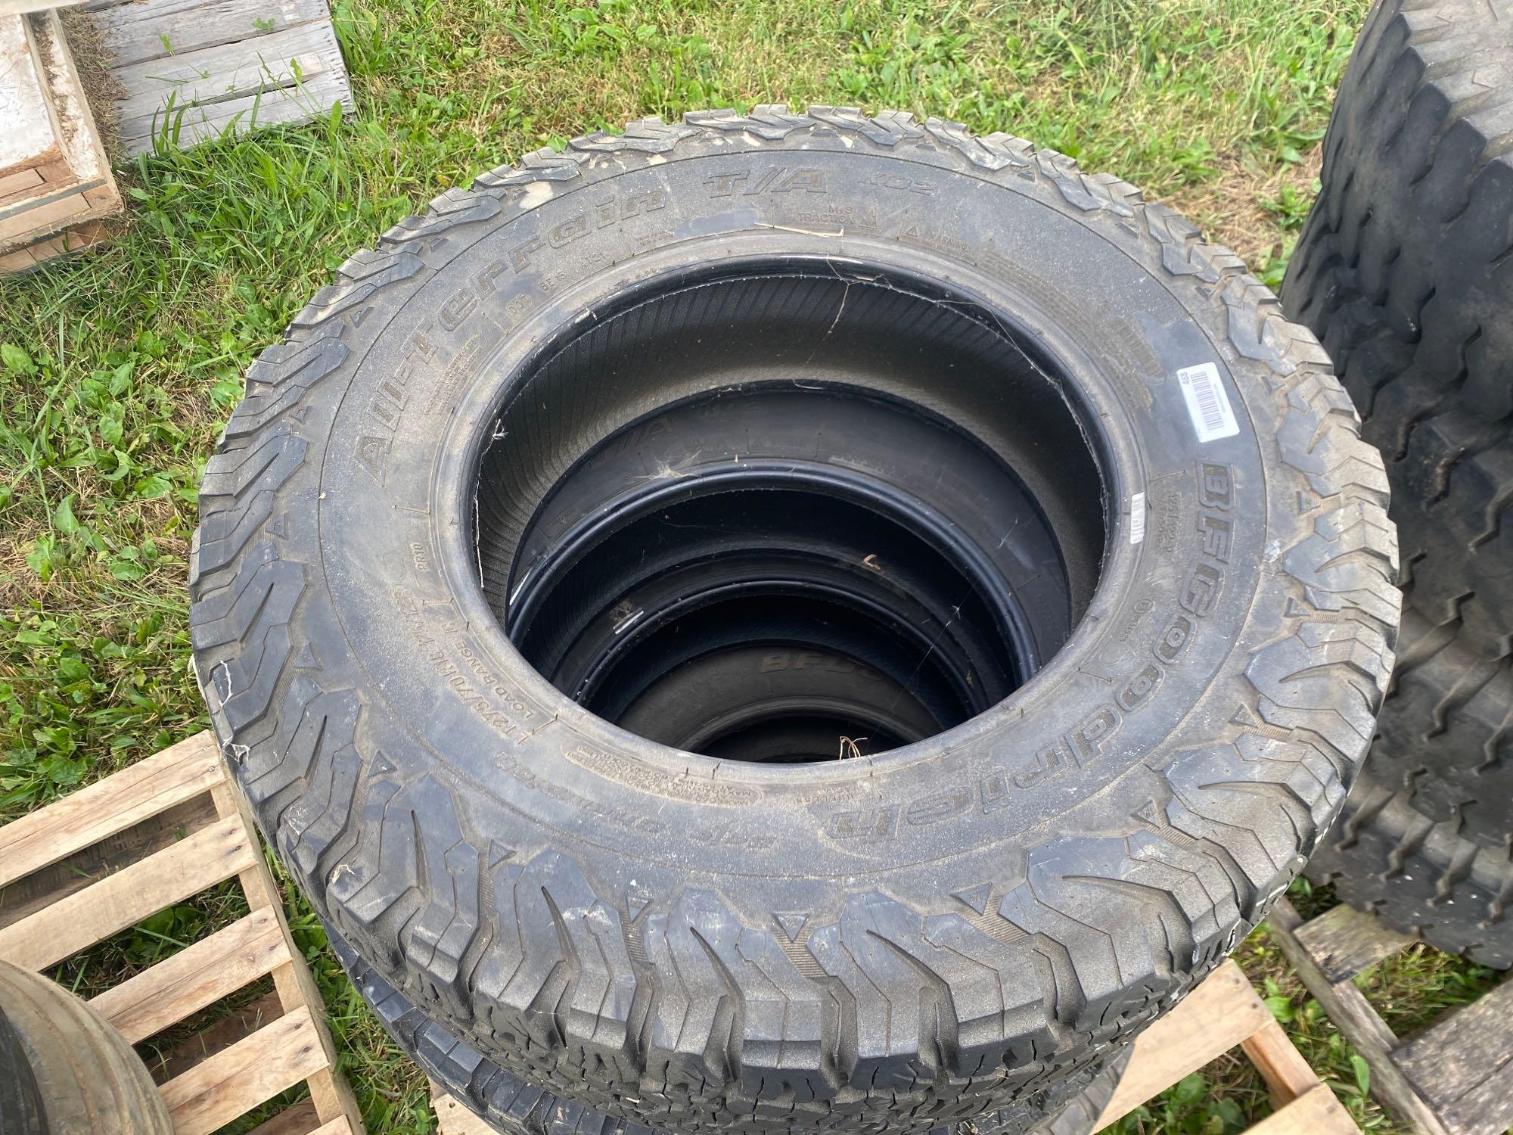 Image for 4 BF Goodrich All Terrain Tires size 27570R18